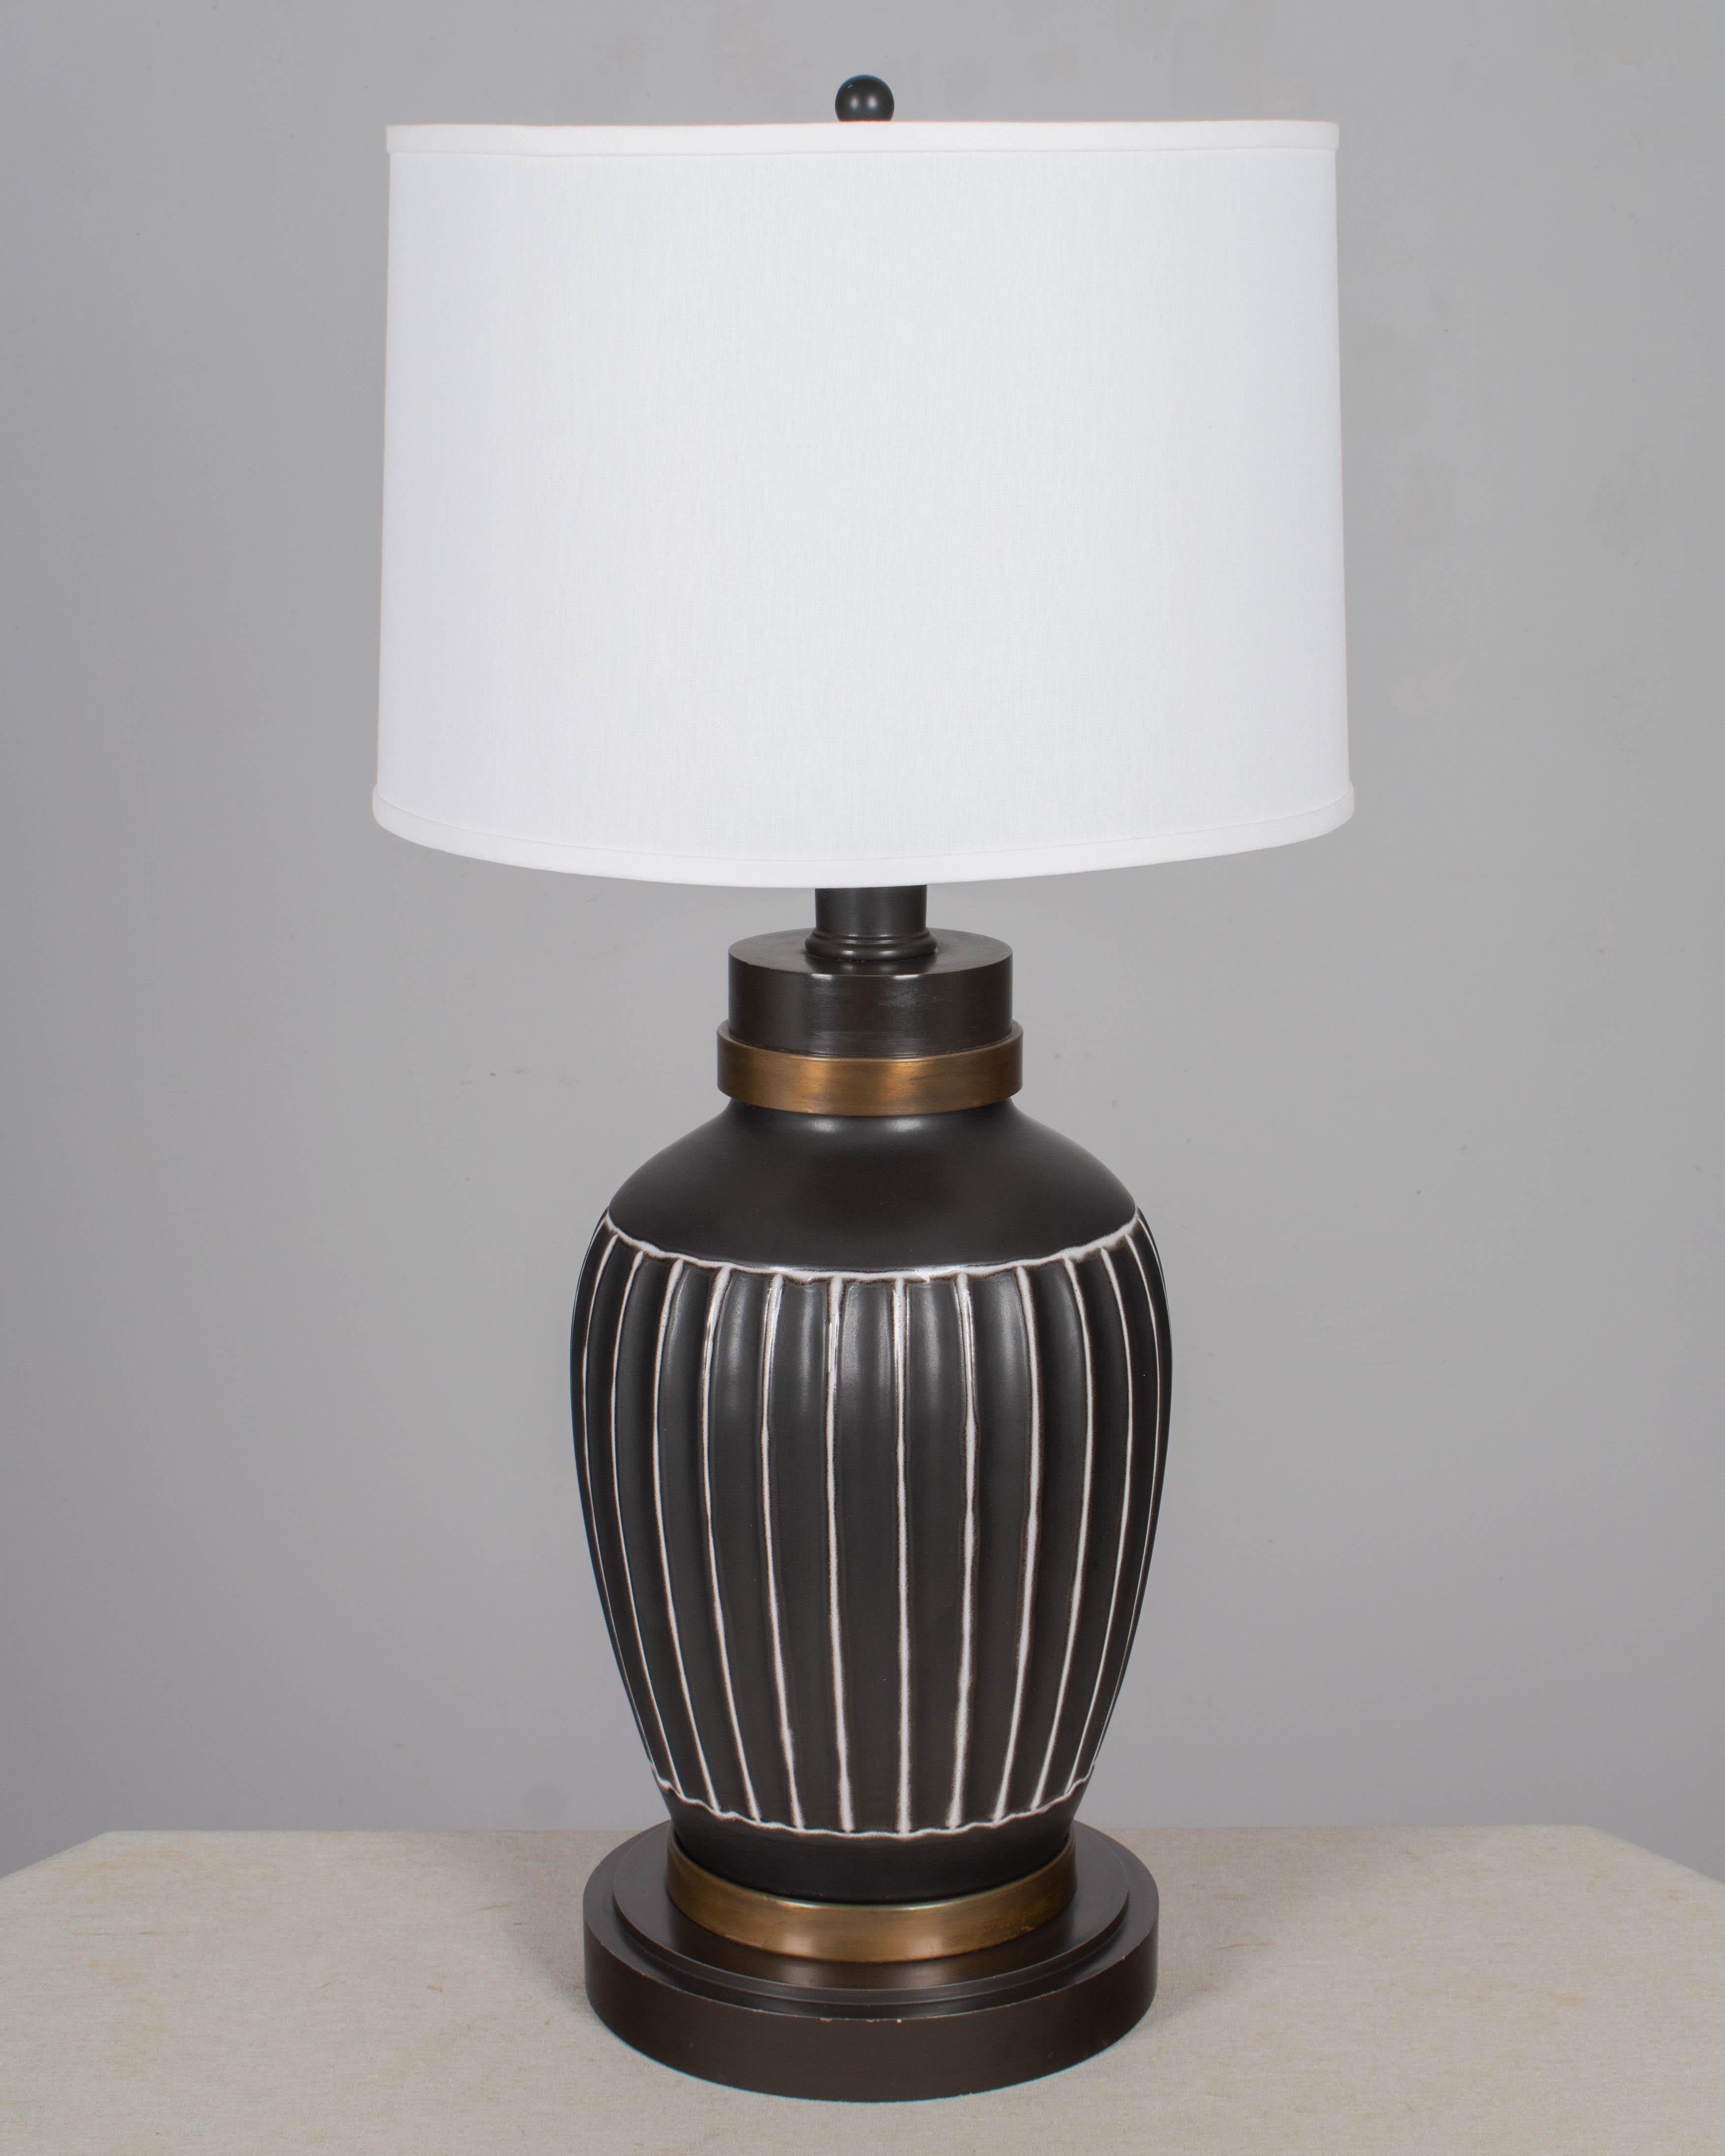 A Danish Mid Century Modern large Soholm black matte ceramic pottery lamp with black painted wood base and brass details. Mark to underside: Soholm Made in Denmark. Rewired with new socket. Shade NOT in included. Circa 1950s. 
Dimensions: 
32